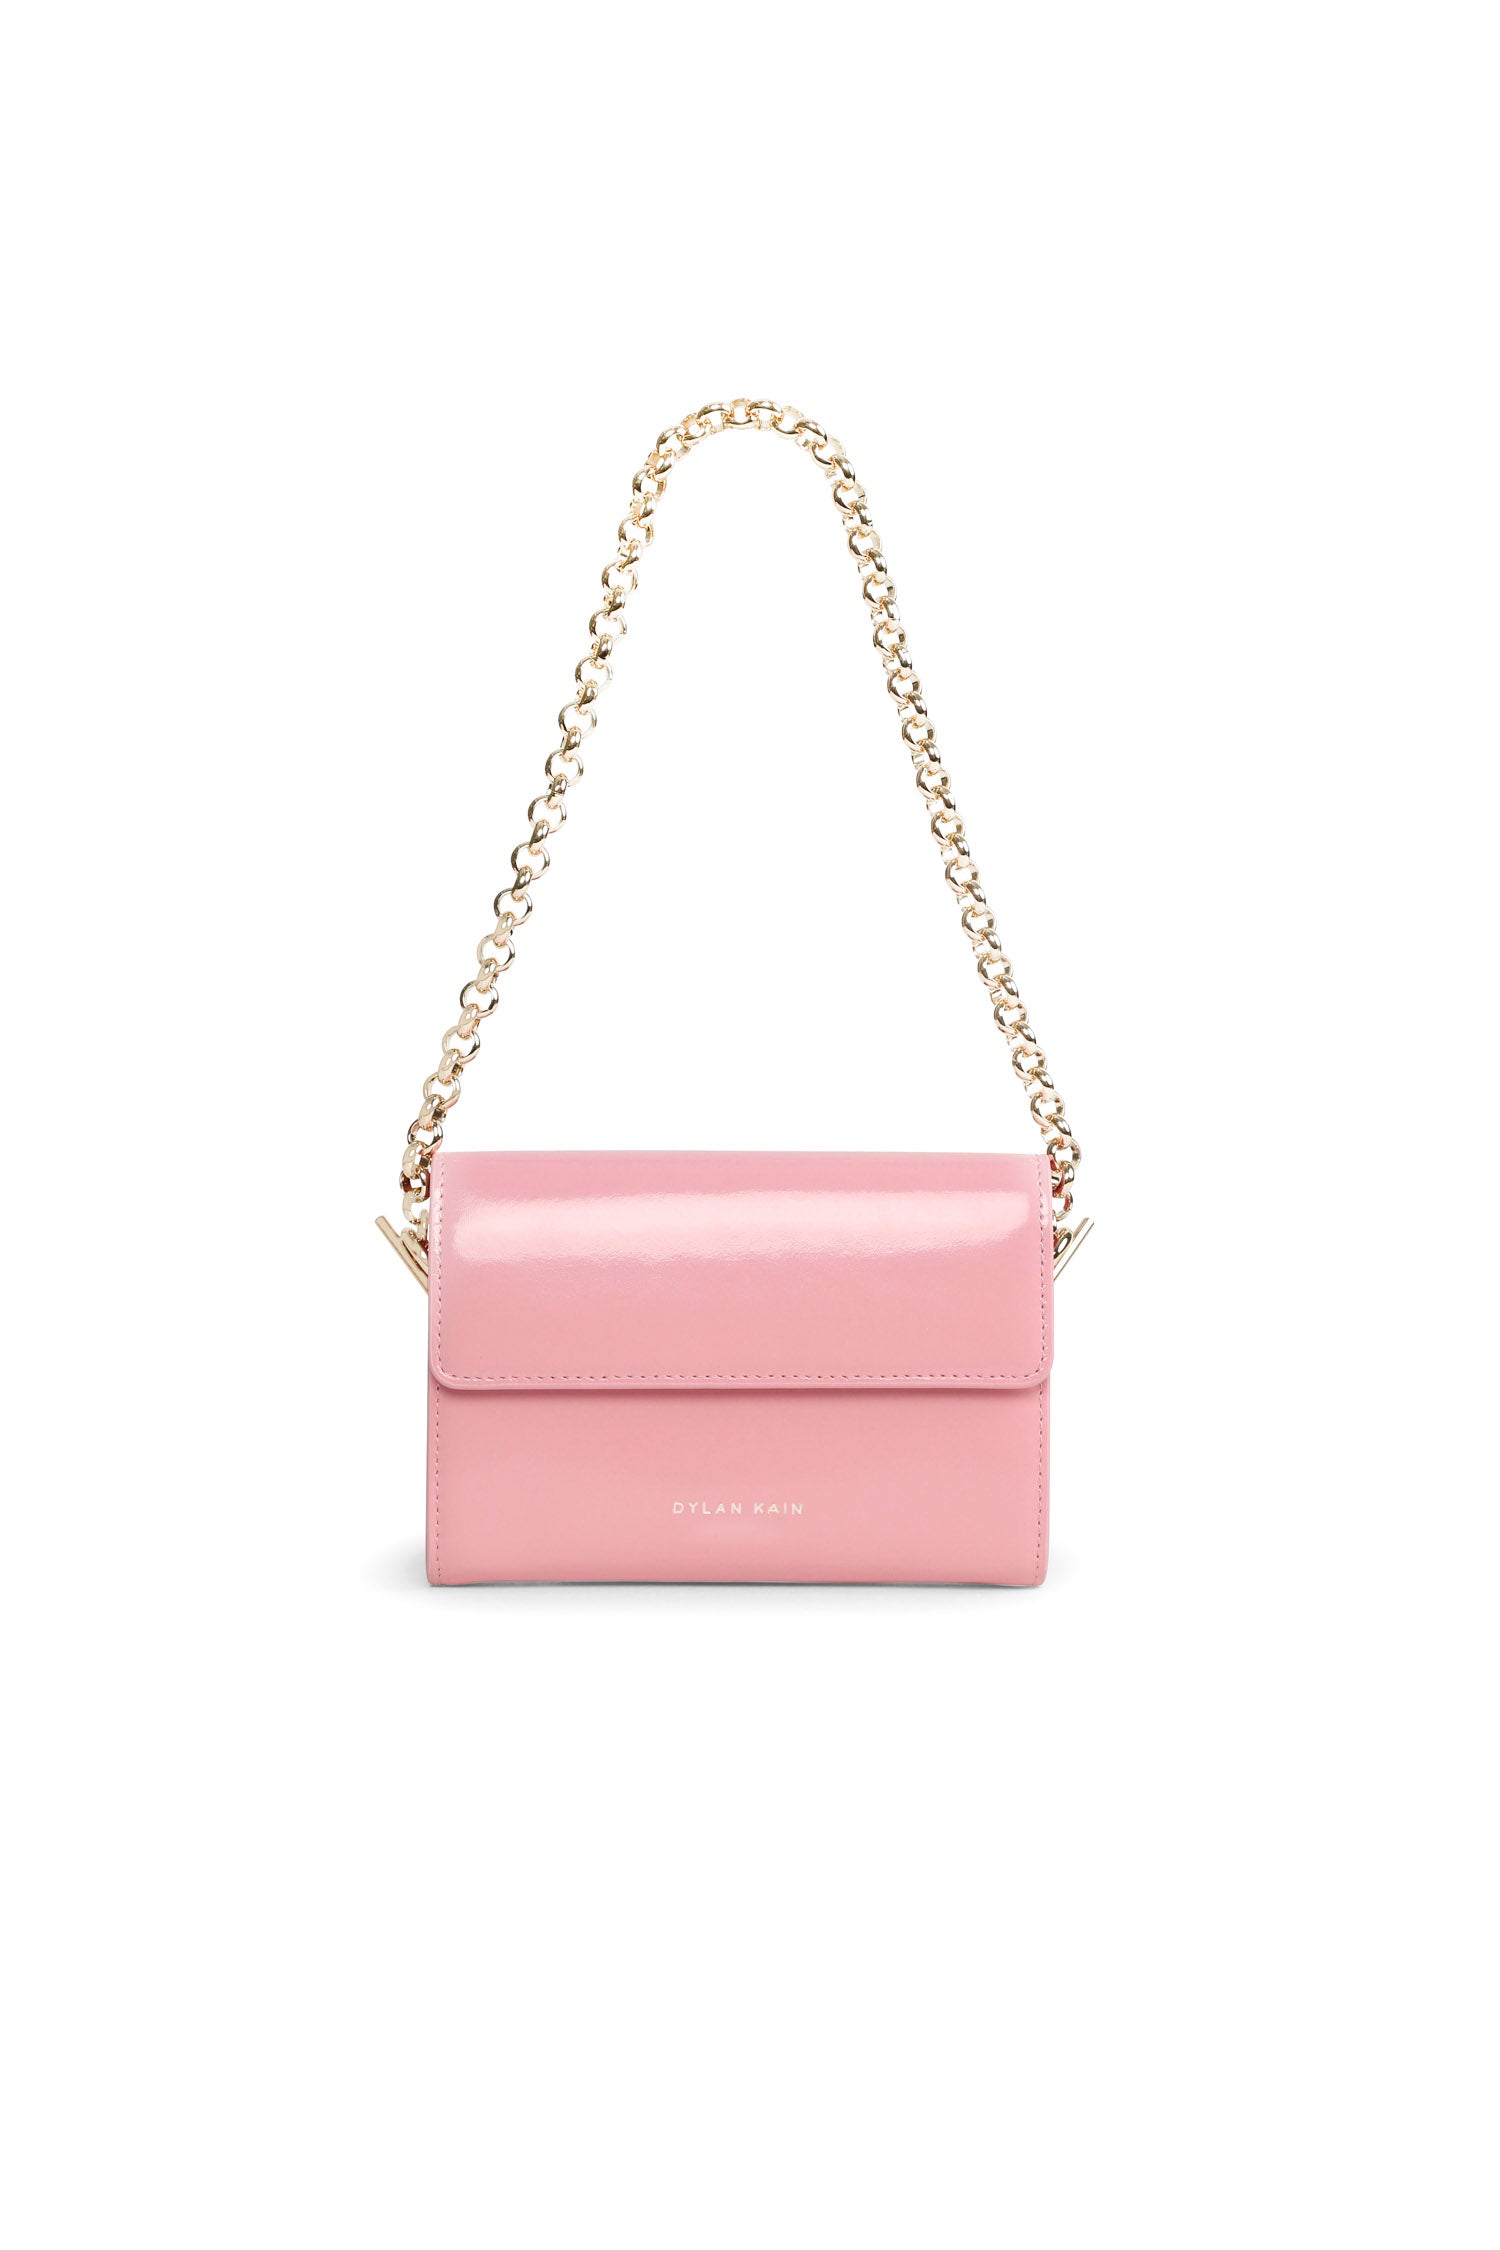 The Juicy Patent Phone Wallet Candy Pink